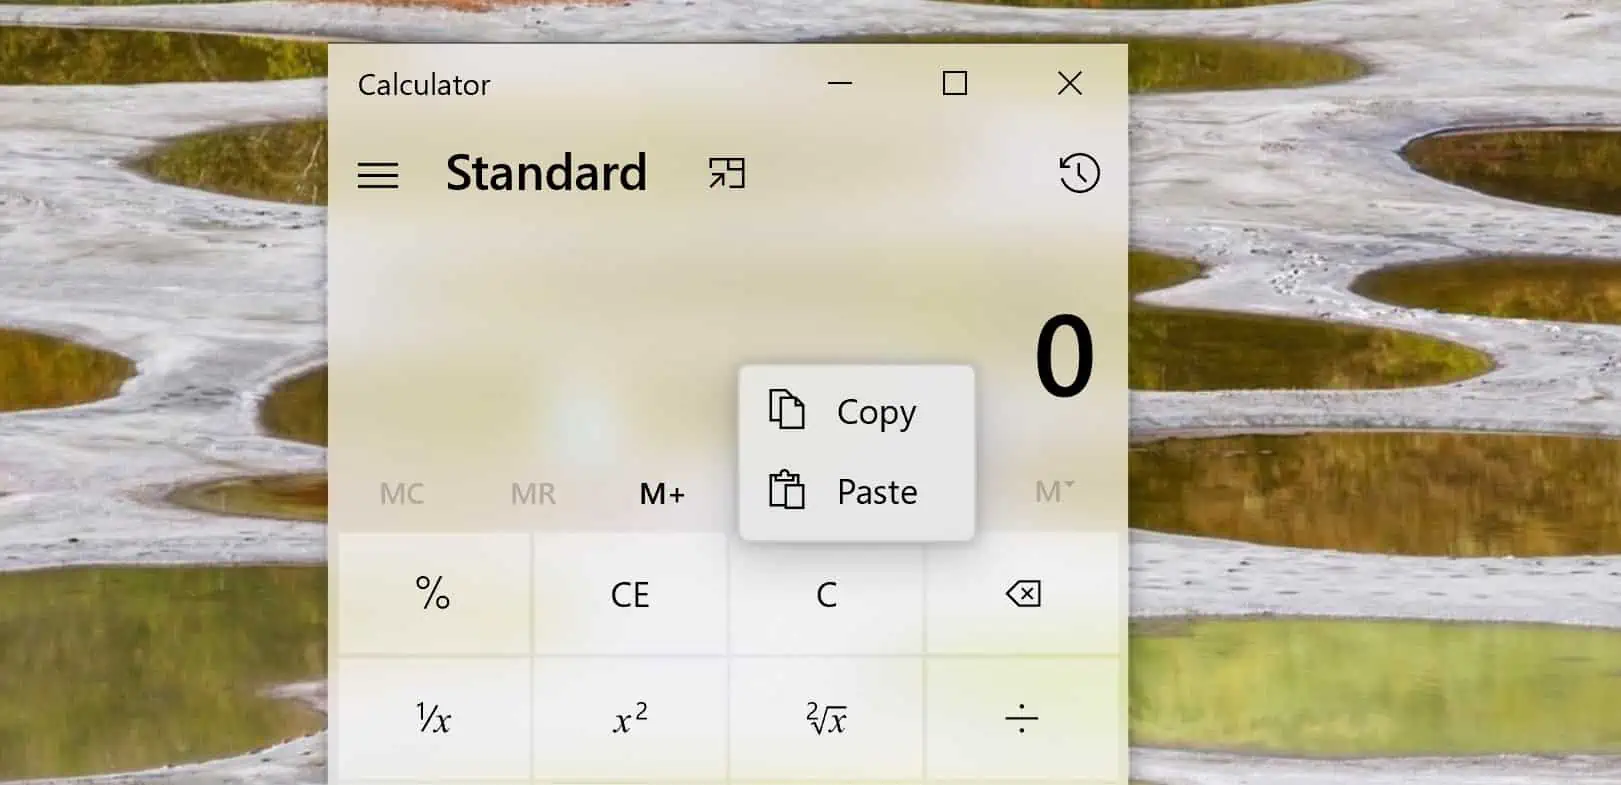 How To Get Rounded Corners In Windows 10